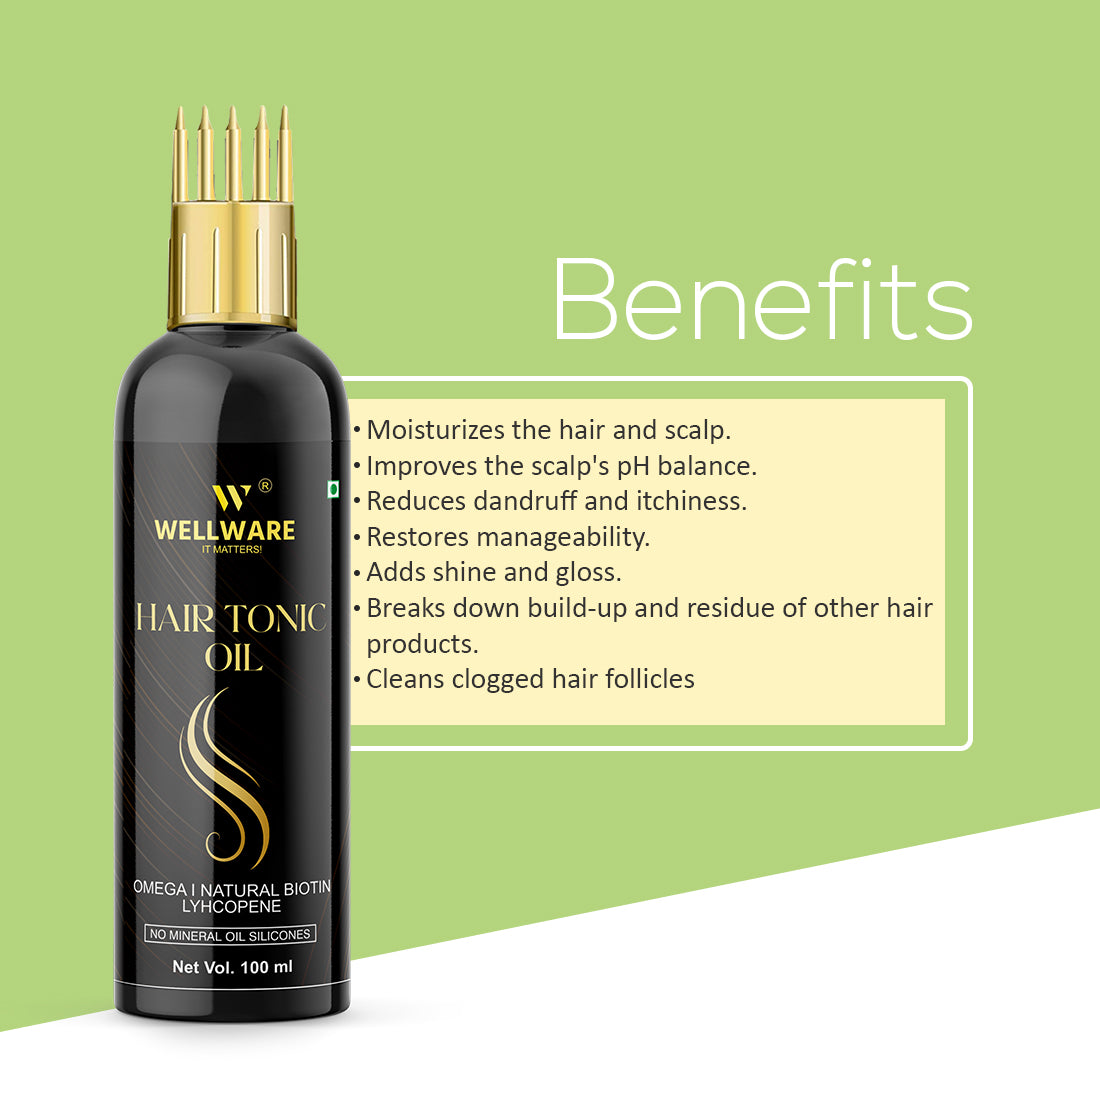 WELLWARE 100 % Pure Hair Tonic Oil - WITH COMB APPLICATOR - Cold Pressed - Hair Regrowth Hair Oil